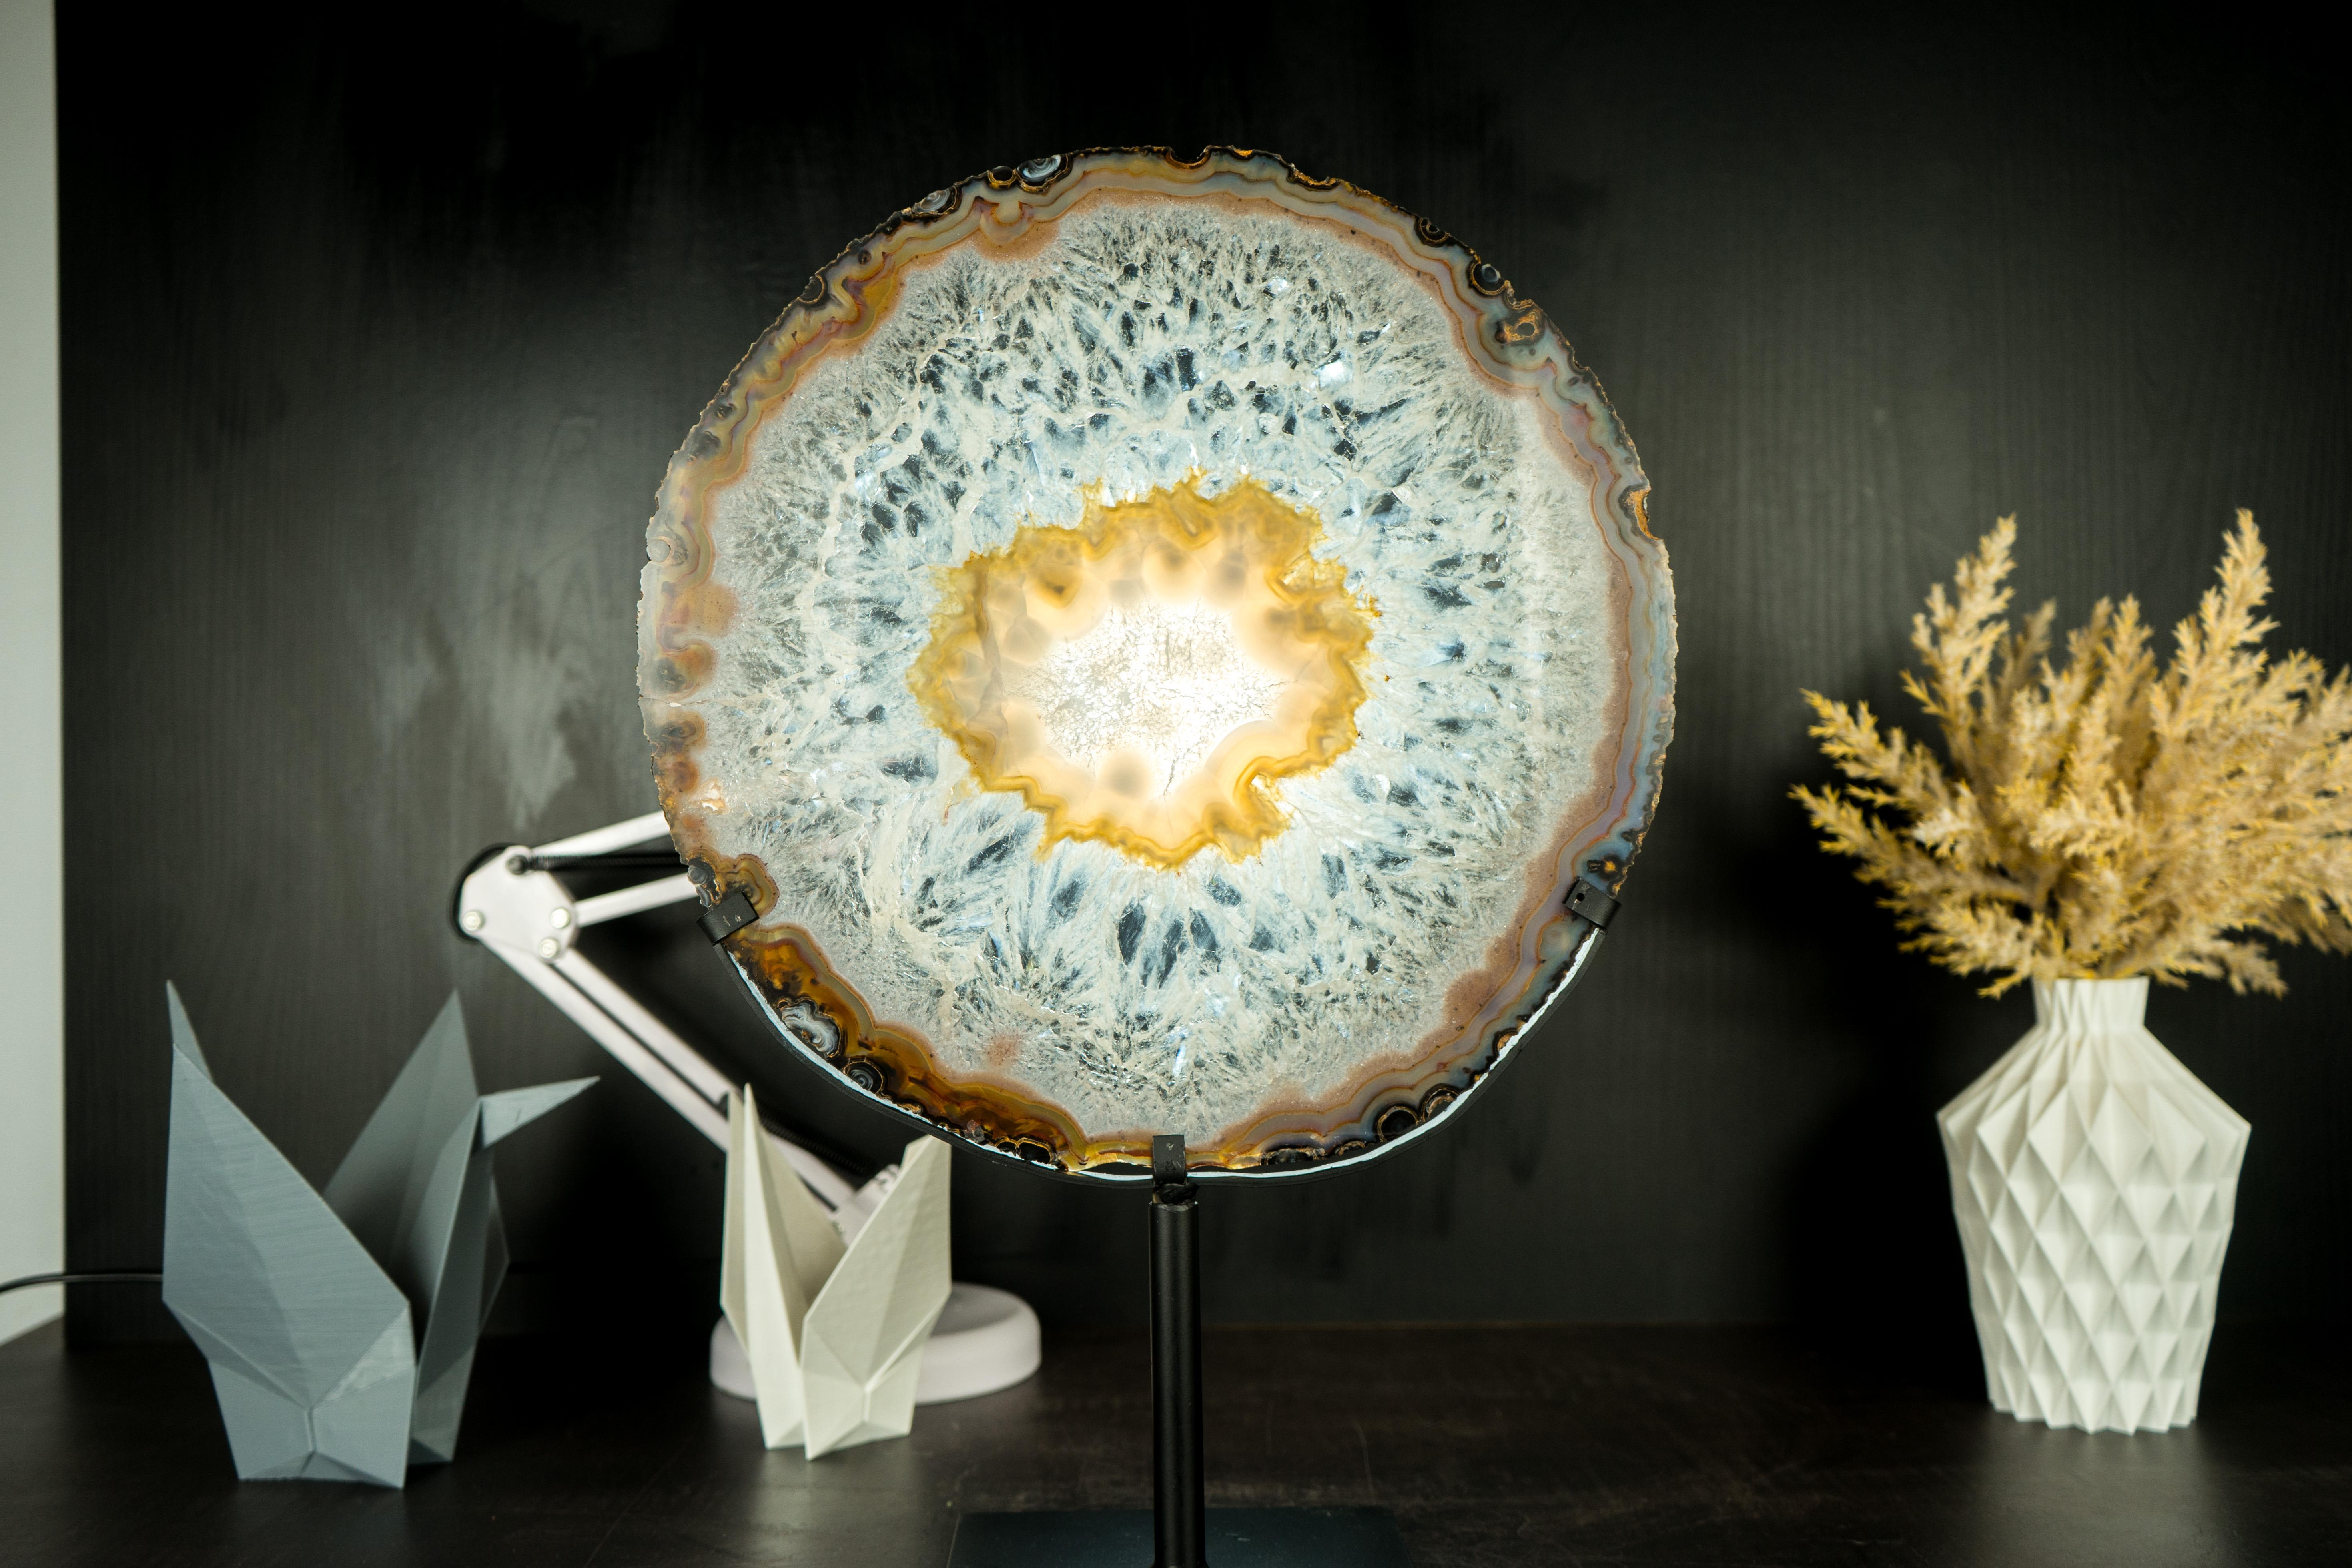 Gallery Grade Large Lace Agate Slice, with Ice-Like Crystal and Colorful Agate 7